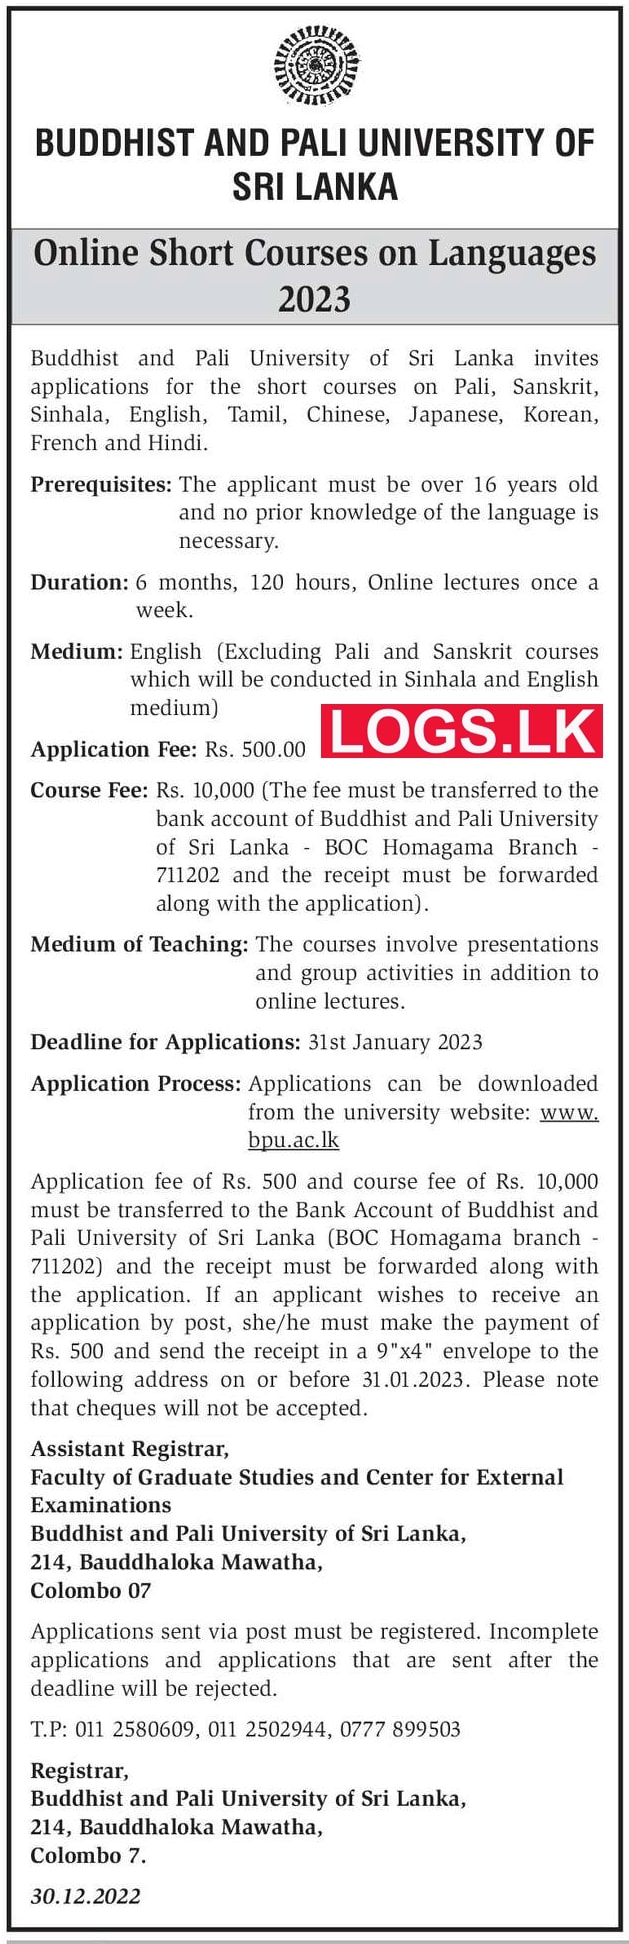 Online Short Courses on Languages 2023 - Buddhist and Pali University Application Form Download in Sinhala Tamil English